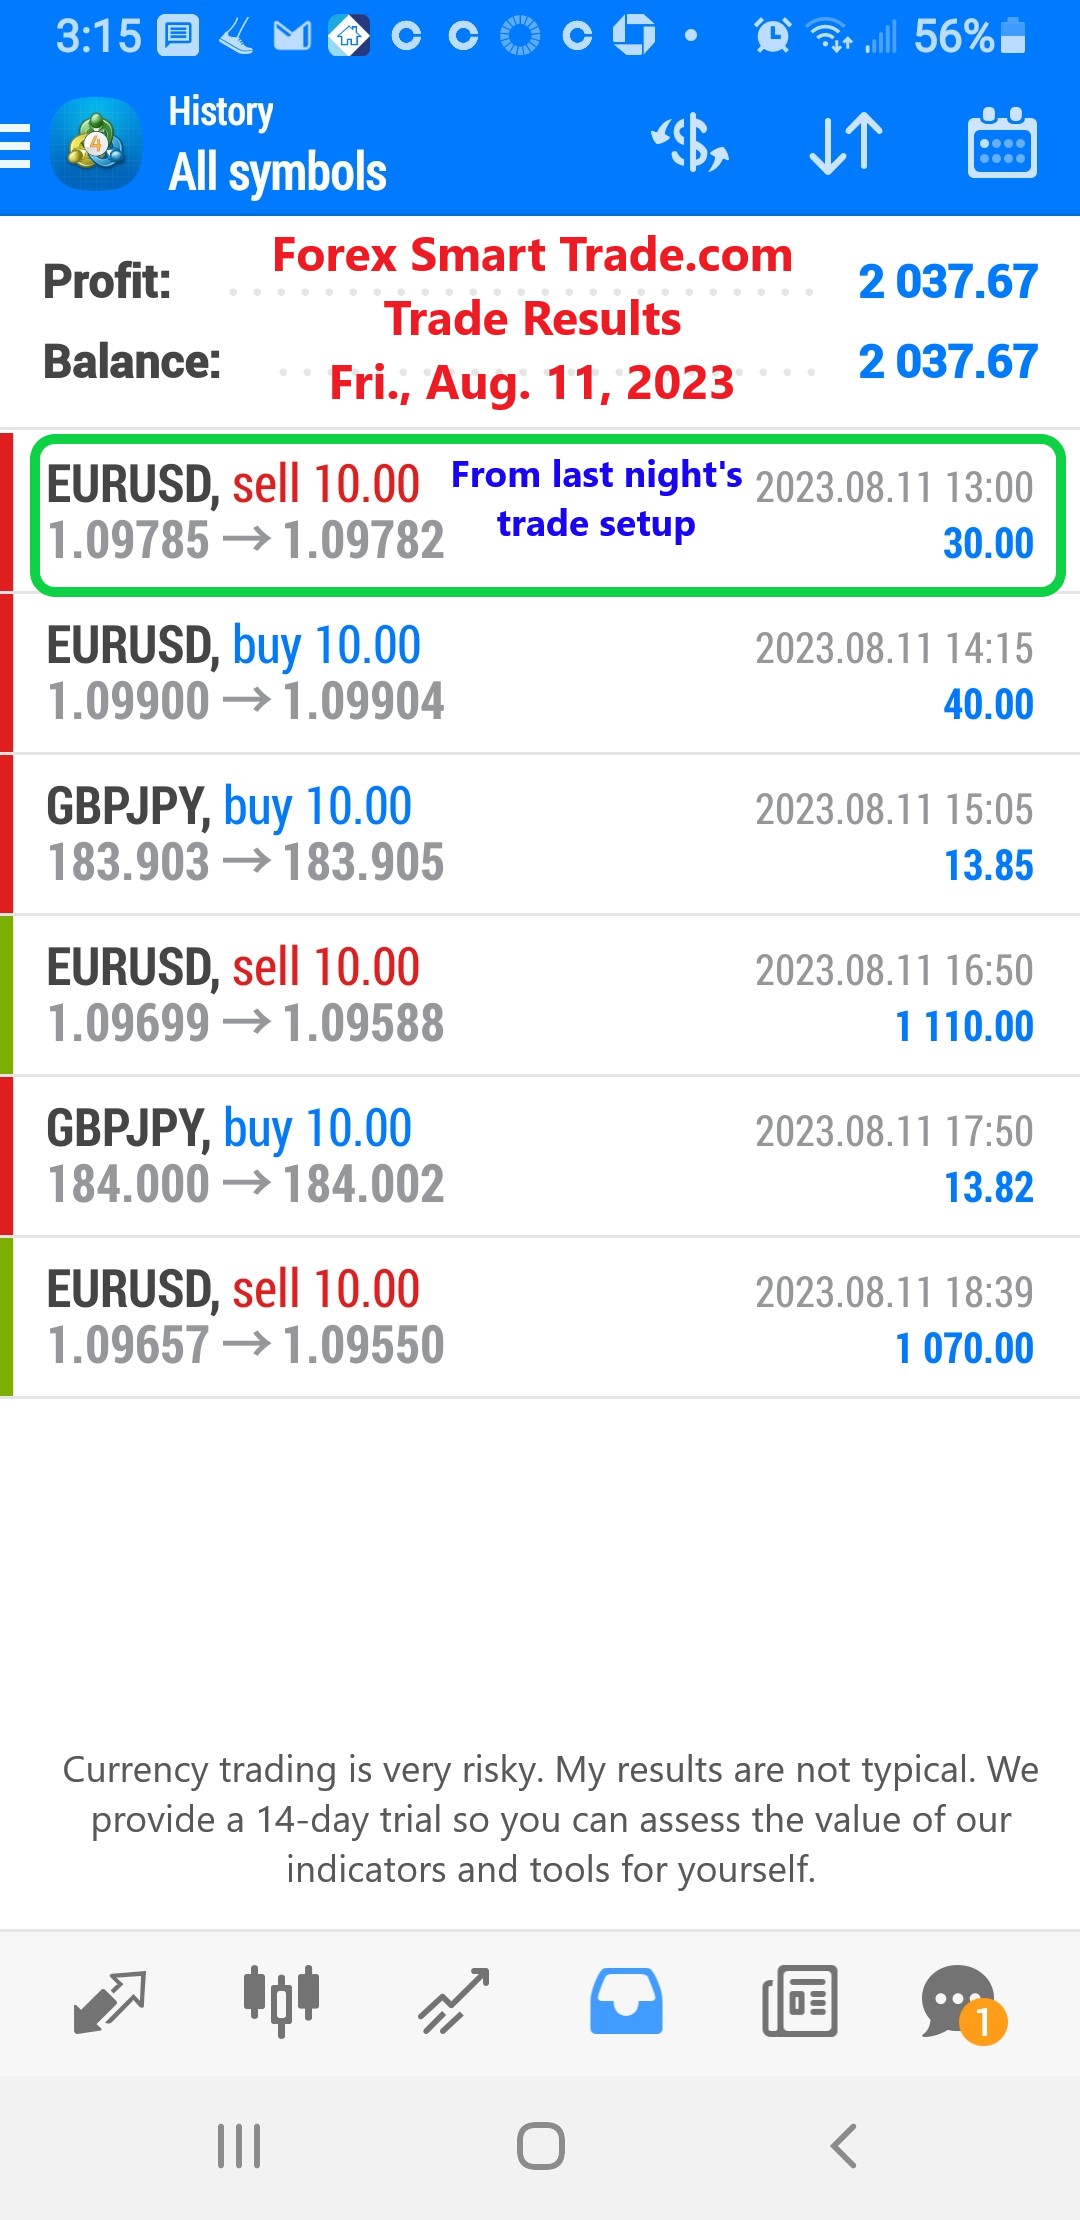 Currency trading is very risky. My results are not typical. We provide a 14-day trial so you can assess the value of our indicators and tools for yourself.